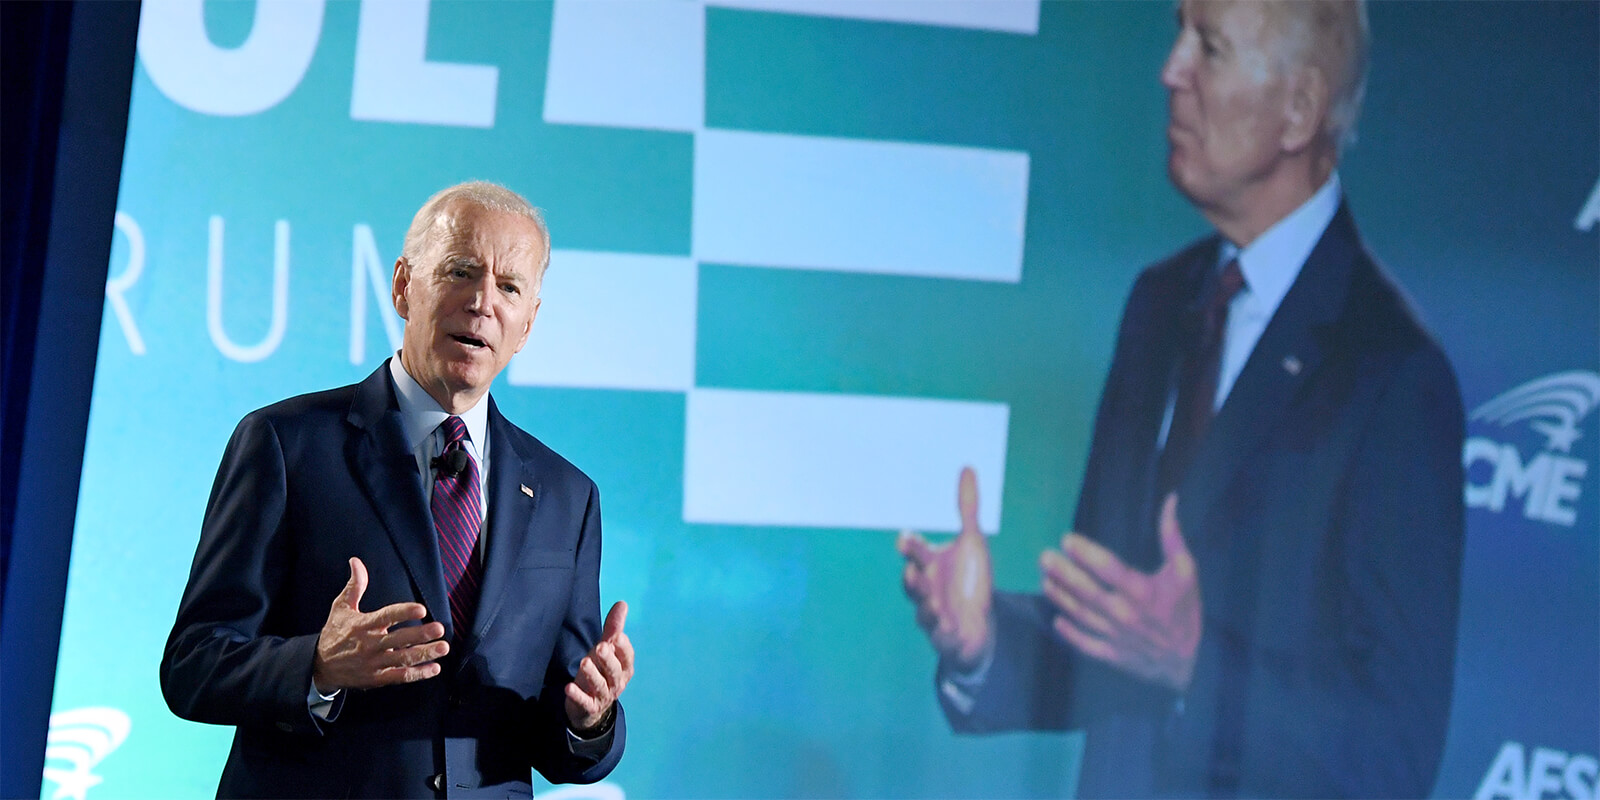 Biden: ‘AFSCME workers are holding this country together right now’